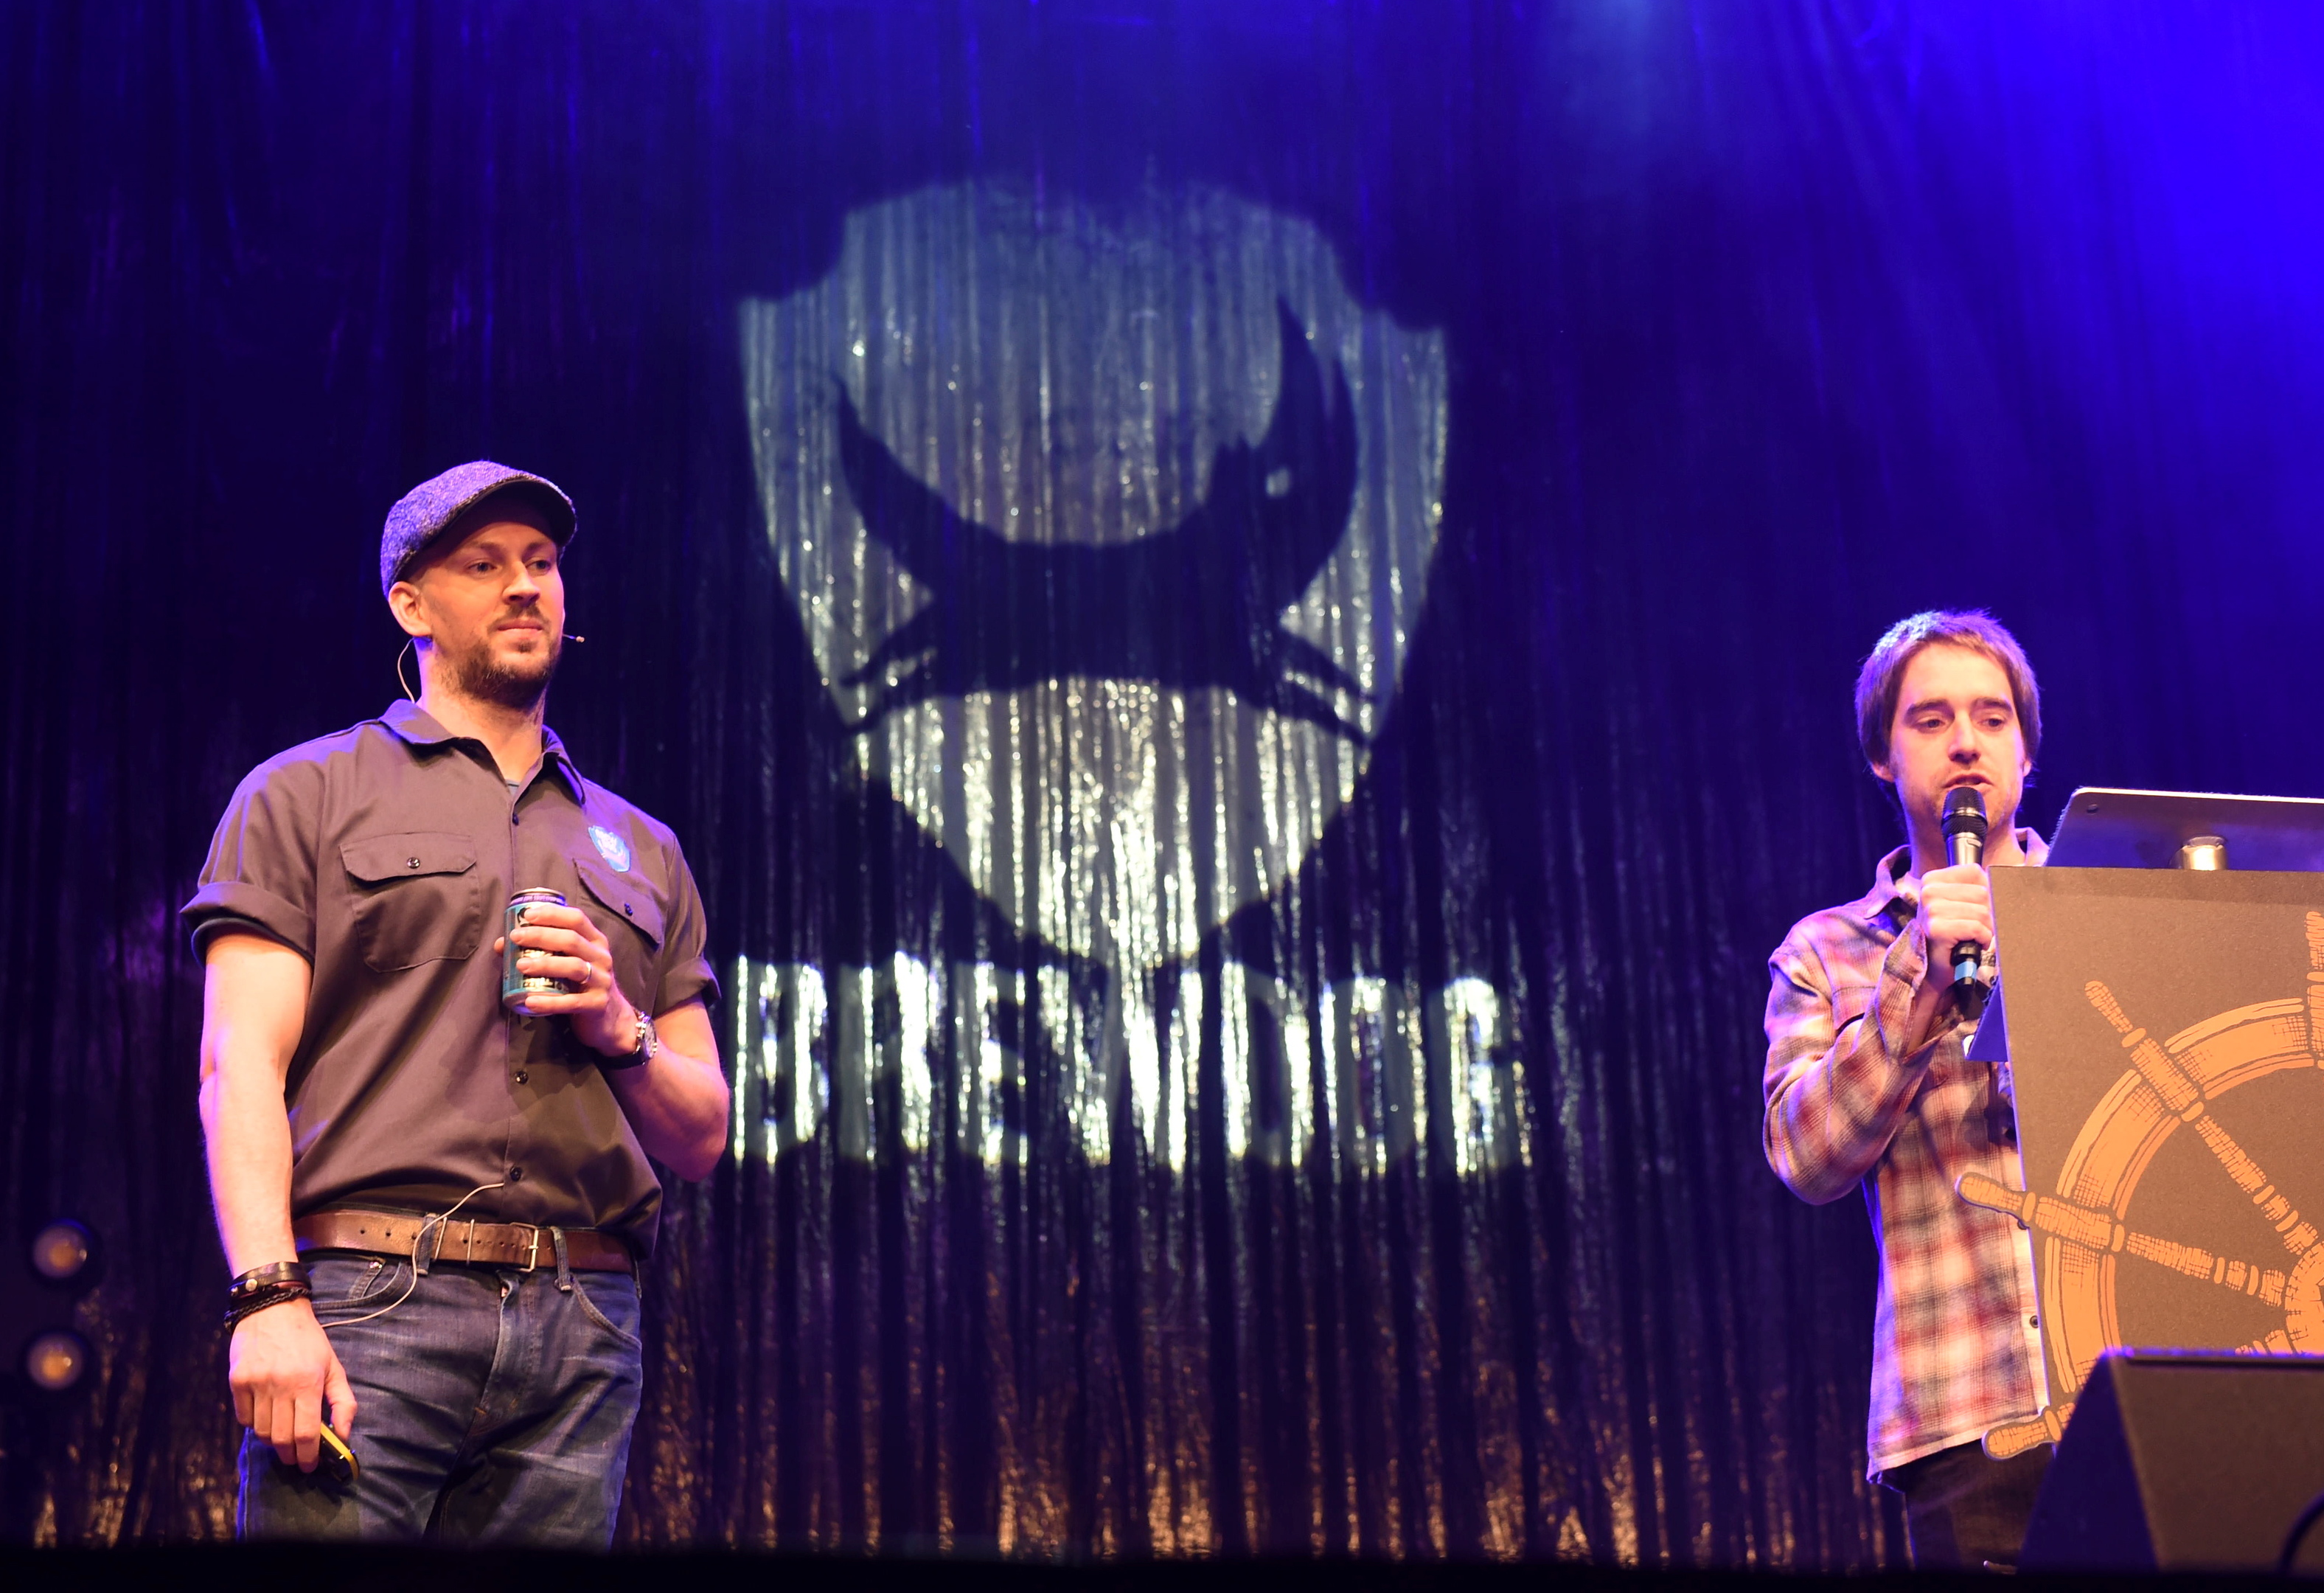 Brewdog founders James Watt and Martin Dickie speaking an AGM held at the AECC.